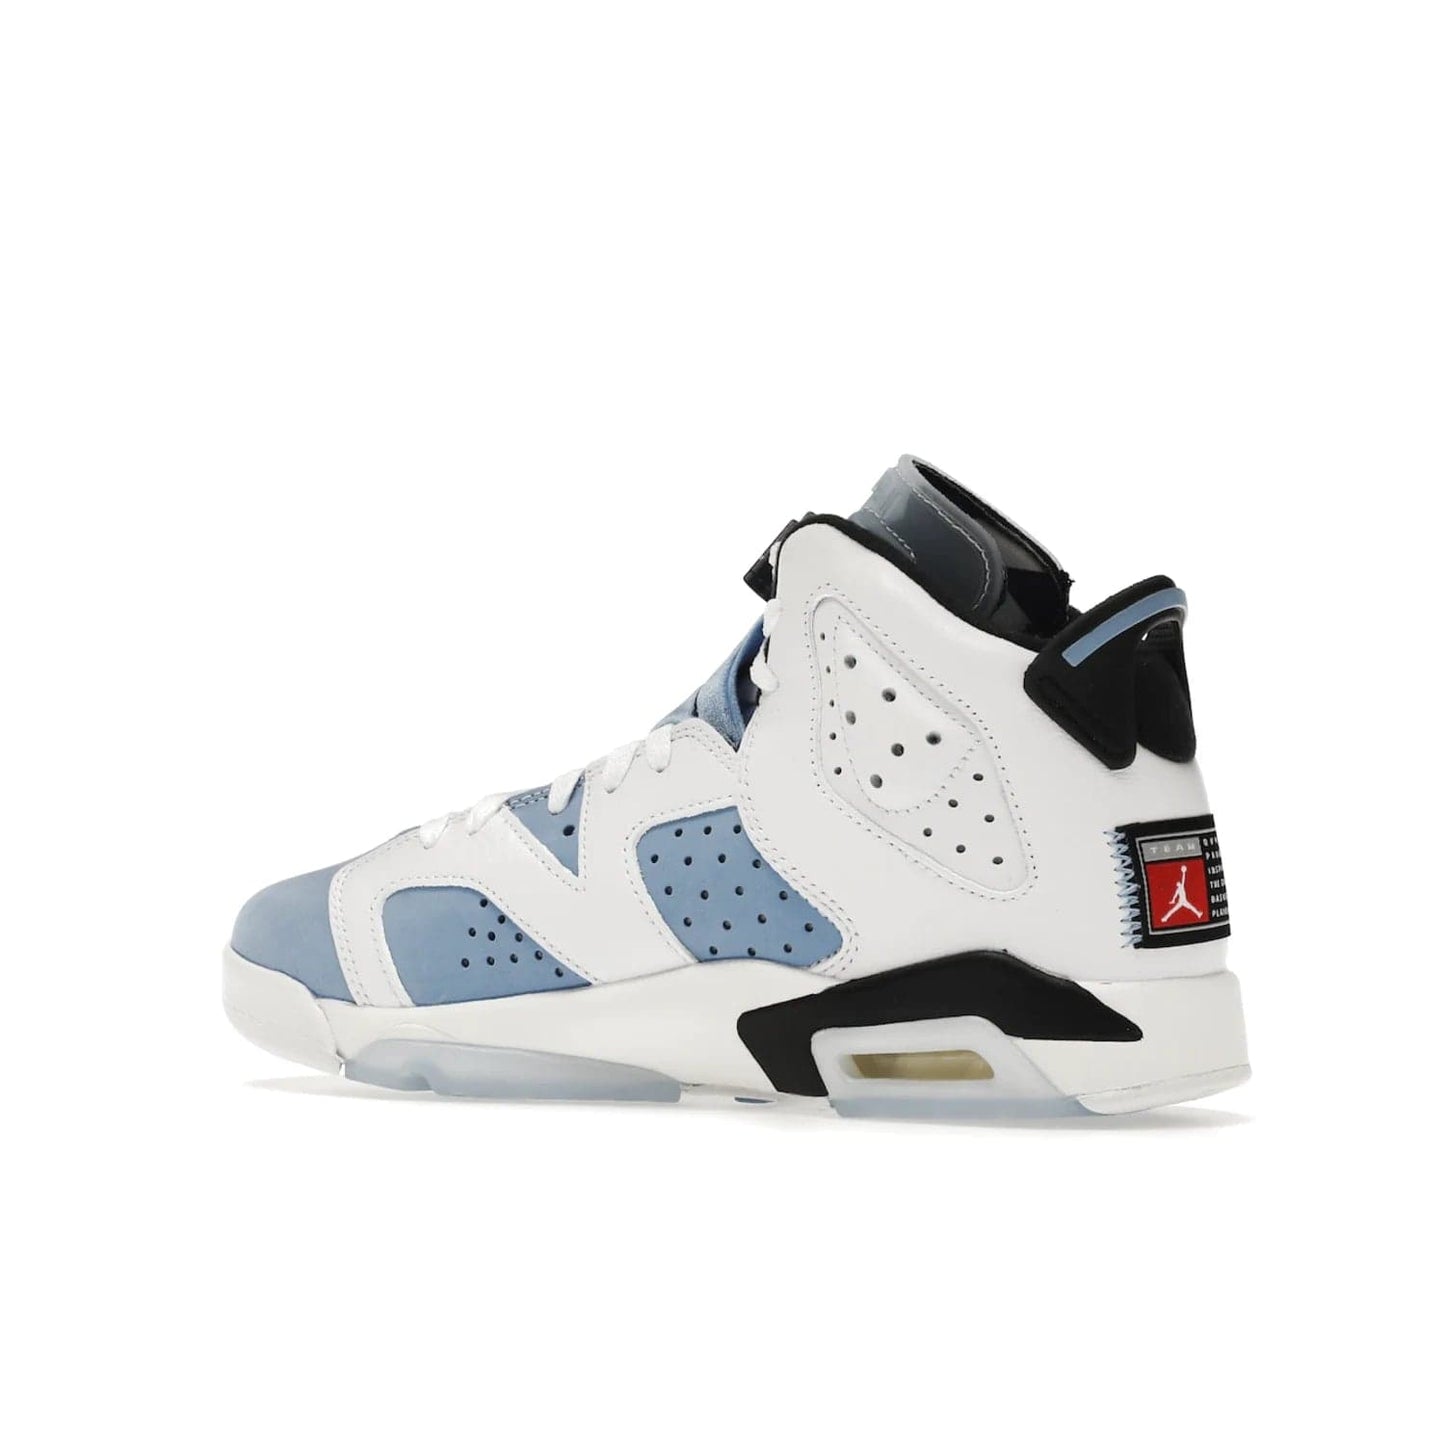 Jordan 6 Retro UNC White (GS) - Image 22 - Only at www.BallersClubKickz.com - Air Jordan 6 Retro UNC White GS: Michael Jordan alma mater, UNC Tar Heels, featuring colorway, nubuck, leather, Jumpman branding and a visible Air unit. Translucent blue/white outsole, perfect for completing sneaker rotation.